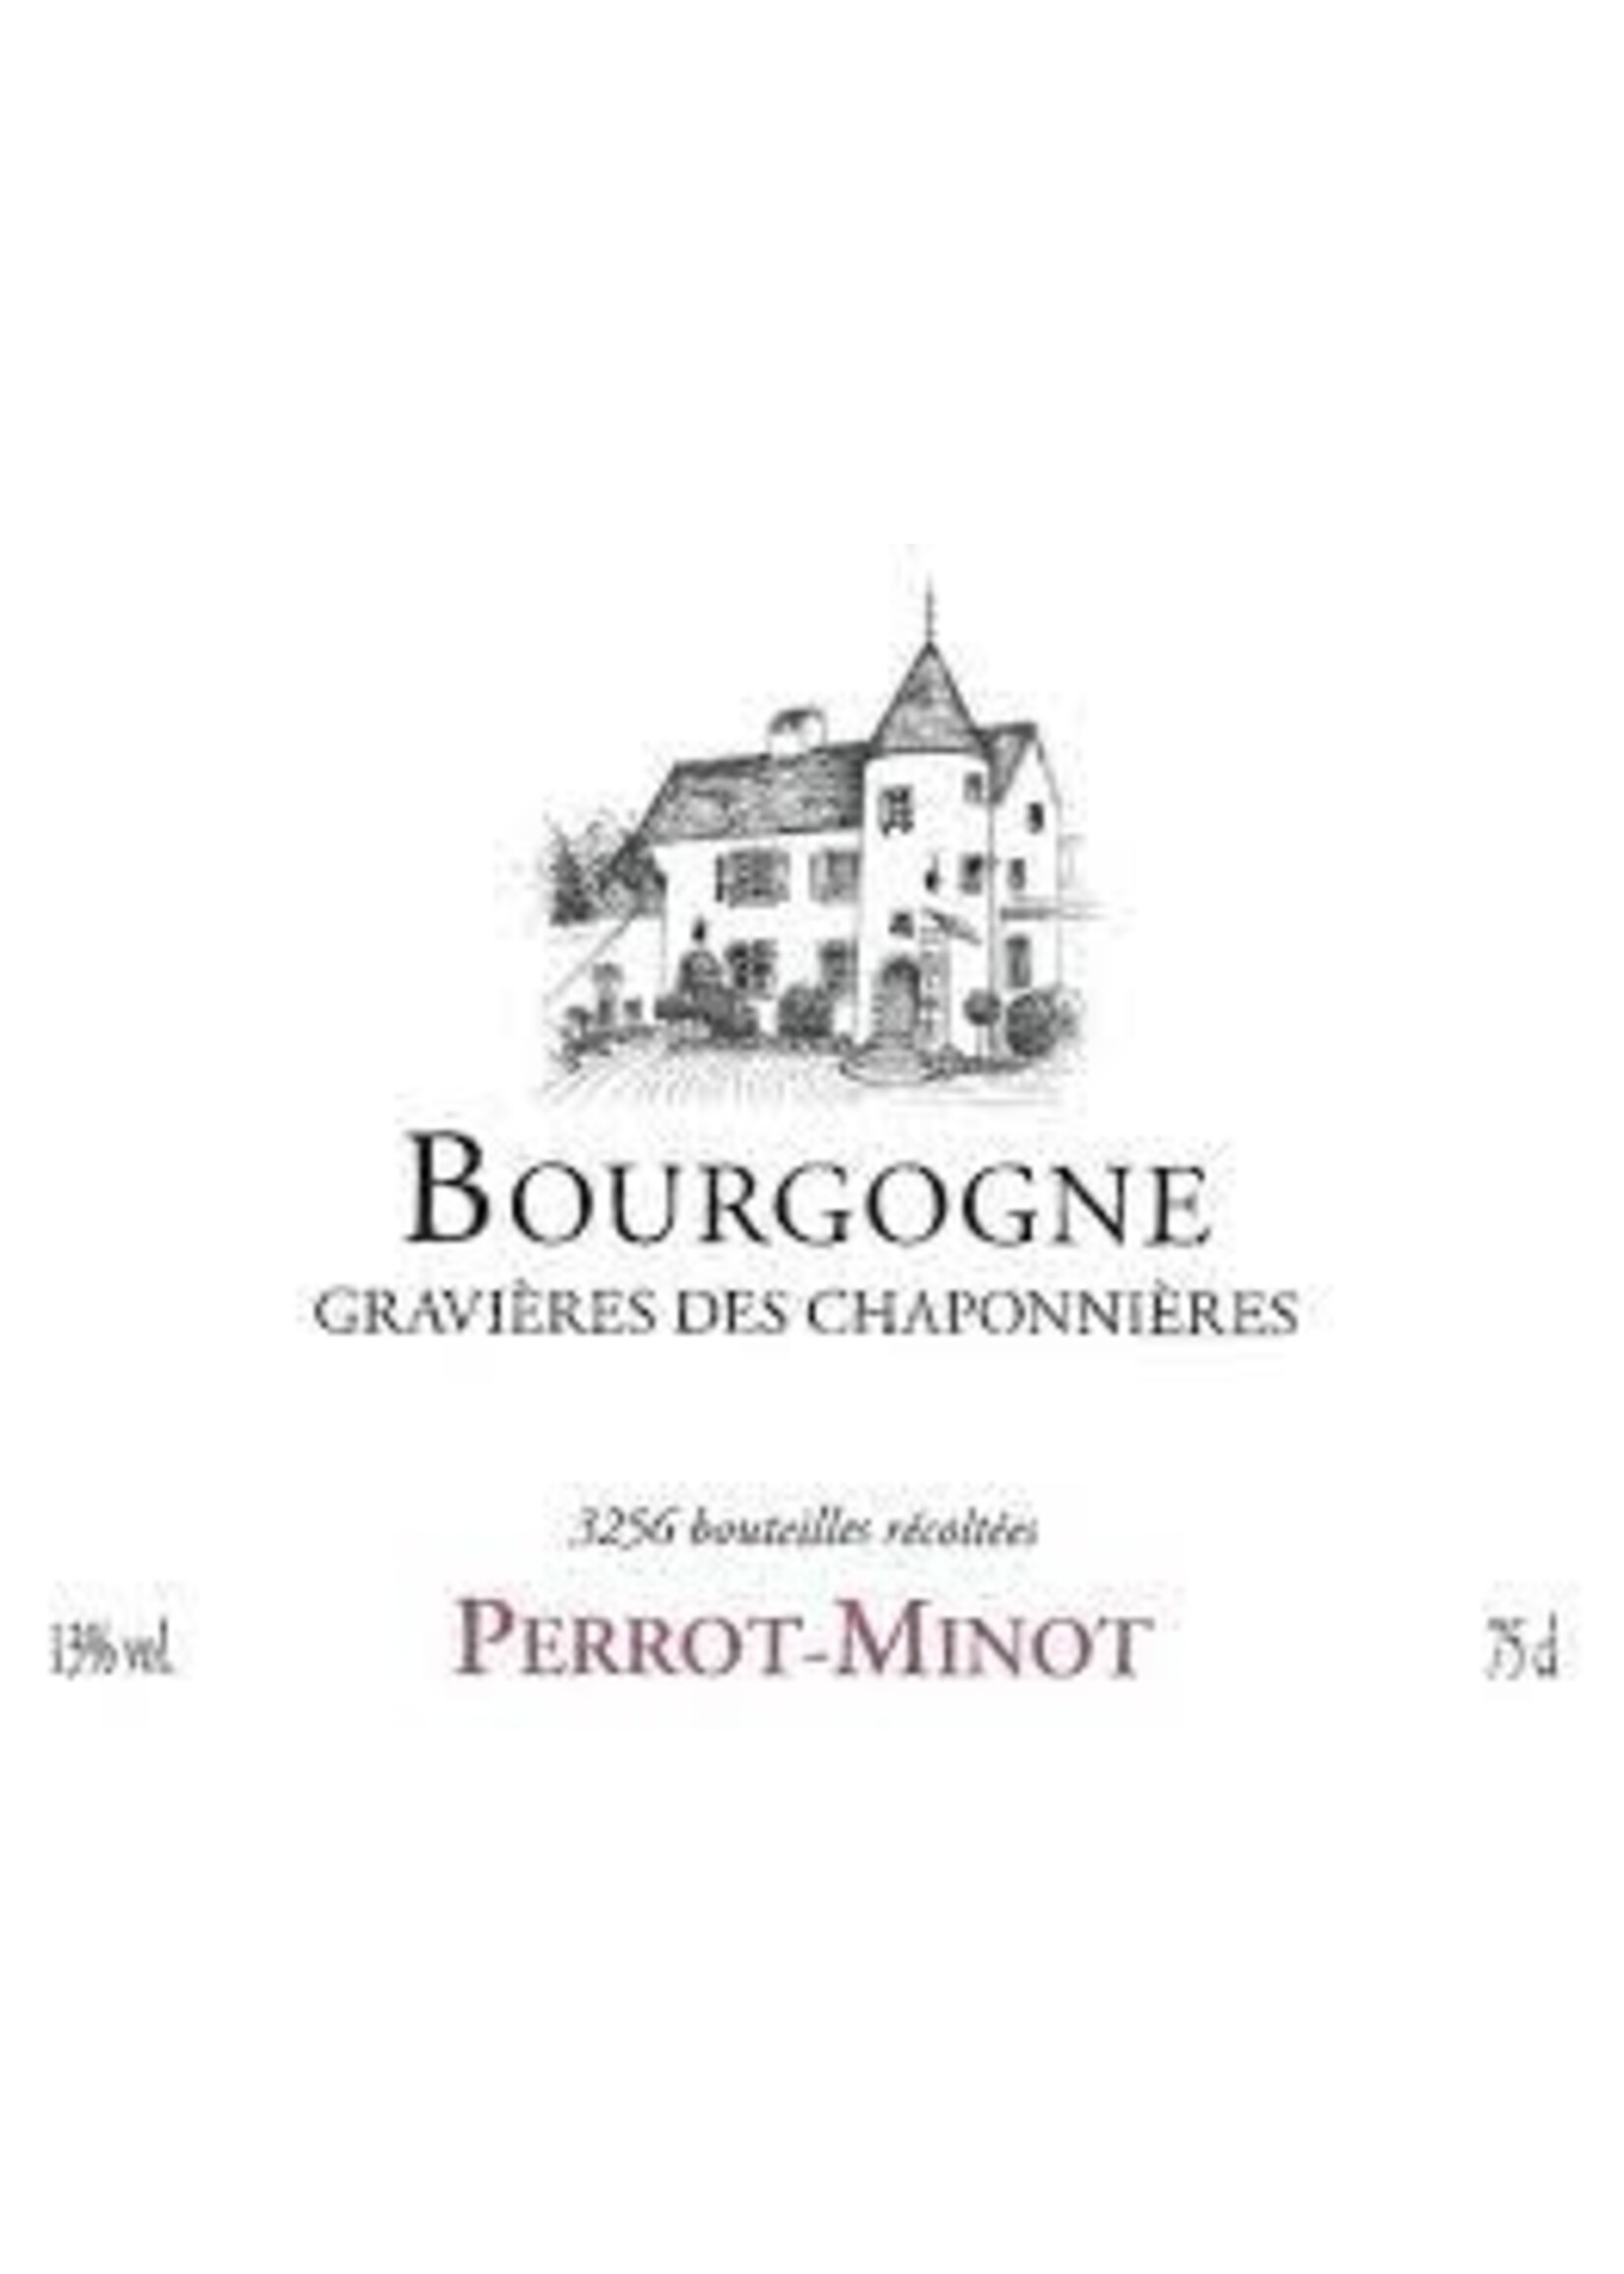 Perrot Minot 2020 Bourgogne Rouge Gravieres des Chaponnieres 750ml